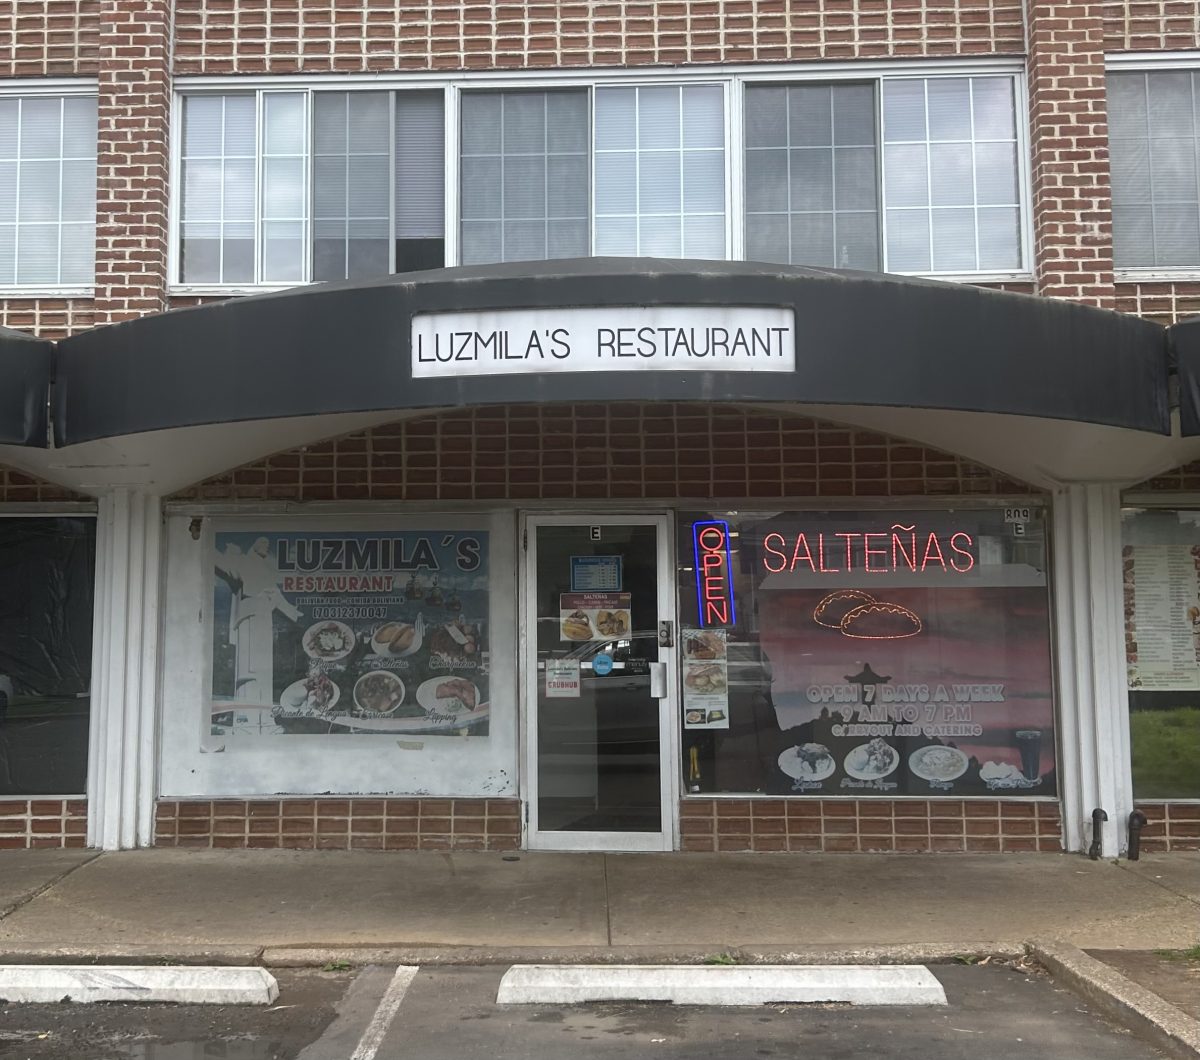 The street view of Luzmilas, a traditional Bolivian restaurant located in downtown Falls Church.